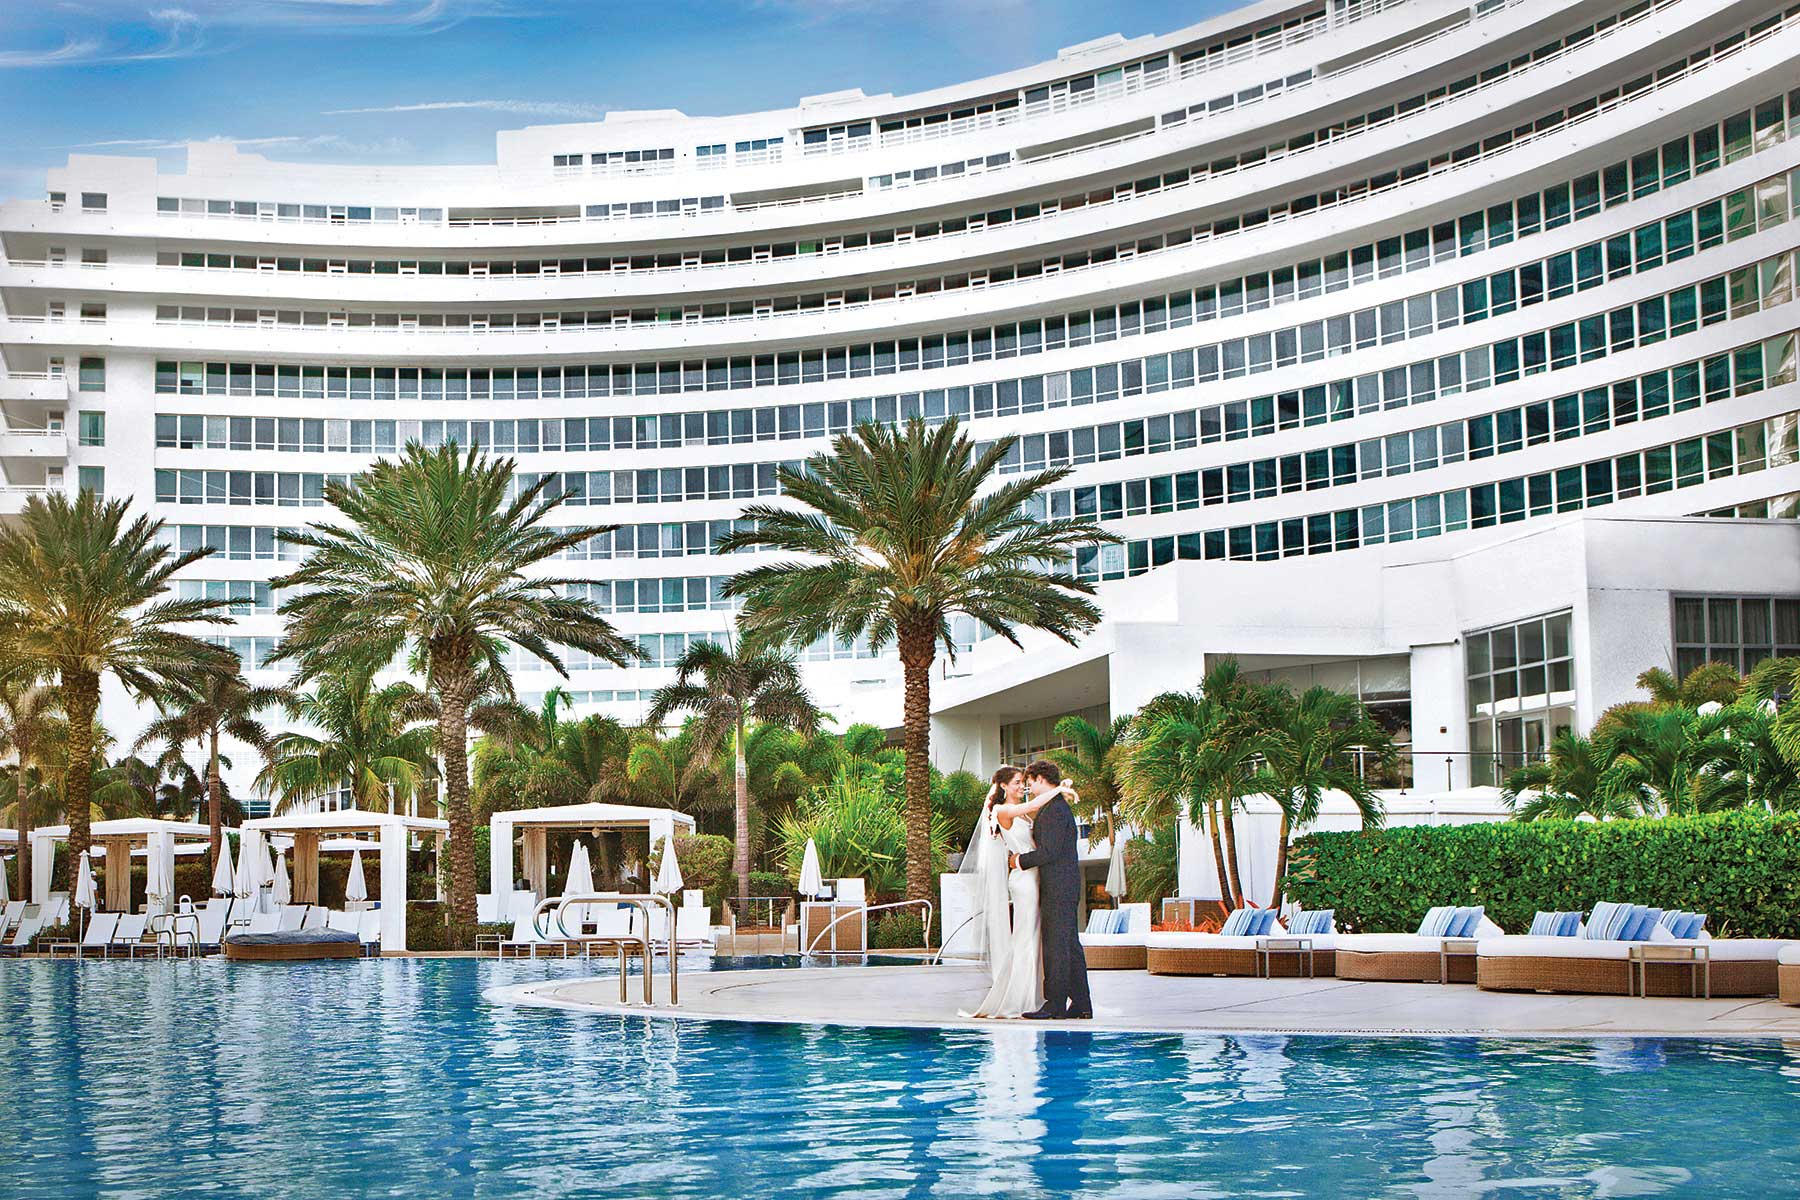 38 Wedding Venues You Have to See | Fontainebleau Miami, Florida